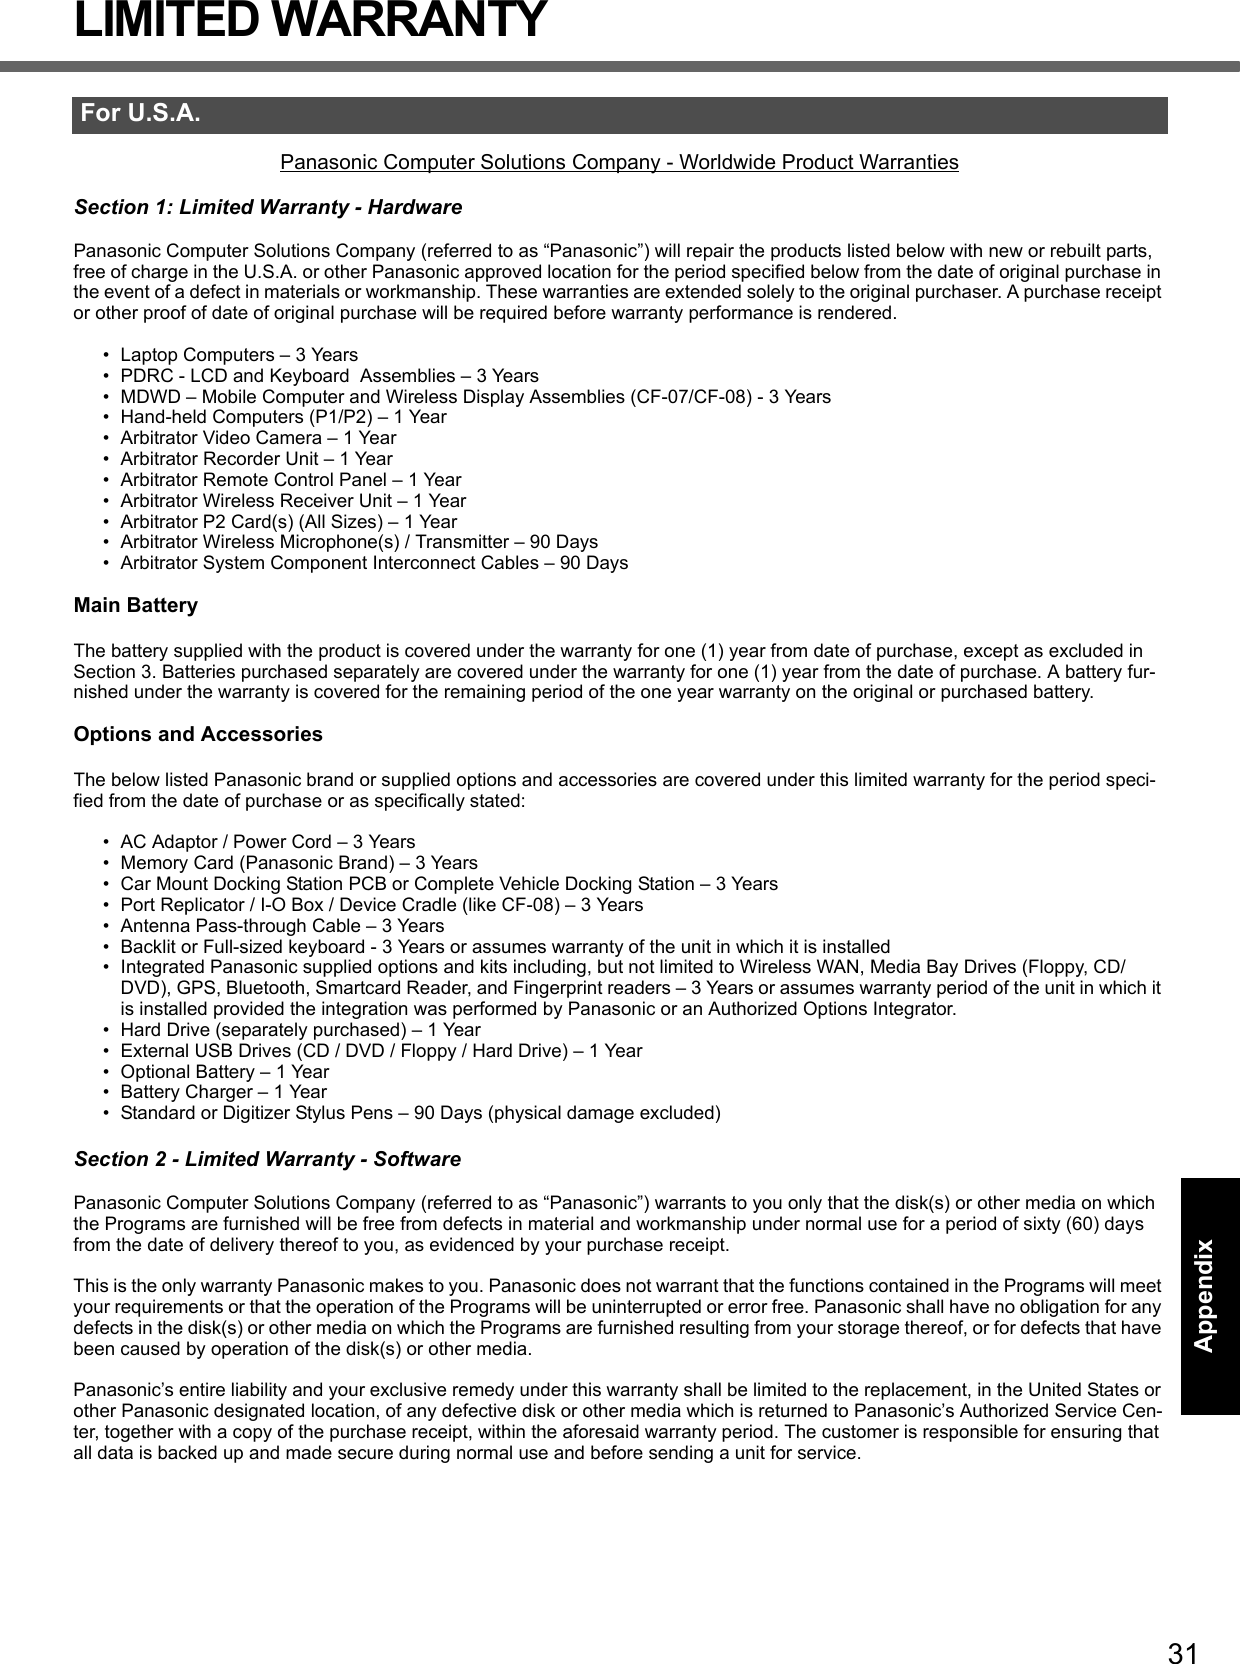 31Getting StartedUseful InformationTroubleshootingAppendixLIMITED WARRANTYPanasonic Computer Solutions Company - Worldwide Product WarrantiesSection 1: Limited Warranty - HardwarePanasonic Computer Solutions Company (referred to as “Panasonic”) will repair the products listed below with new or rebuilt parts, free of charge in the U.S.A. or other Panasonic approved location for the period specified below from the date of original purchase in the event of a defect in materials or workmanship. These warranties are extended solely to the original purchaser. A purchase receipt or other proof of date of original purchase will be required before warranty performance is rendered. • Laptop Computers – 3 Years• PDRC - LCD and Keyboard  Assemblies – 3 Years• MDWD – Mobile Computer and Wireless Display Assemblies (CF-07/CF-08) - 3 Years• Hand-held Computers (P1/P2) – 1 Year• Arbitrator Video Camera – 1 Year• Arbitrator Recorder Unit – 1 Year• Arbitrator Remote Control Panel – 1 Year• Arbitrator Wireless Receiver Unit – 1 Year• Arbitrator P2 Card(s) (All Sizes) – 1 Year• Arbitrator Wireless Microphone(s) / Transmitter – 90 Days• Arbitrator System Component Interconnect Cables – 90 DaysMain BatteryThe battery supplied with the product is covered under the warranty for one (1) year from date of purchase, except as excluded in Section 3. Batteries purchased separately are covered under the warranty for one (1) year from the date of purchase. A battery fur-nished under the warranty is covered for the remaining period of the one year warranty on the original or purchased battery.Options and AccessoriesThe below listed Panasonic brand or supplied options and accessories are covered under this limited warranty for the period speci-fied from the date of purchase or as specifically stated:• AC Adaptor / Power Cord – 3 Years• Memory Card (Panasonic Brand) – 3 Years • Car Mount Docking Station PCB or Complete Vehicle Docking Station – 3 Years• Port Replicator / I-O Box / Device Cradle (like CF-08) – 3 Years• Antenna Pass-through Cable – 3 Years• Backlit or Full-sized keyboard - 3 Years or assumes warranty of the unit in which it is installed• Integrated Panasonic supplied options and kits including, but not limited to Wireless WAN, Media Bay Drives (Floppy, CD/DVD), GPS, Bluetooth, Smartcard Reader, and Fingerprint readers – 3 Years or assumes warranty period of the unit in which it is installed provided the integration was performed by Panasonic or an Authorized Options Integrator.• Hard Drive (separately purchased) – 1 Year• External USB Drives (CD / DVD / Floppy / Hard Drive) – 1 Year• Optional Battery – 1 Year• Battery Charger – 1 Year• Standard or Digitizer Stylus Pens – 90 Days (physical damage excluded)Section 2 - Limited Warranty - SoftwarePanasonic Computer Solutions Company (referred to as “Panasonic”) warrants to you only that the disk(s) or other media on which the Programs are furnished will be free from defects in material and workmanship under normal use for a period of sixty (60) days from the date of delivery thereof to you, as evidenced by your purchase receipt.This is the only warranty Panasonic makes to you. Panasonic does not warrant that the functions contained in the Programs will meet your requirements or that the operation of the Programs will be uninterrupted or error free. Panasonic shall have no obligation for any defects in the disk(s) or other media on which the Programs are furnished resulting from your storage thereof, or for defects that have been caused by operation of the disk(s) or other media.Panasonic’s entire liability and your exclusive remedy under this warranty shall be limited to the replacement, in the United States or other Panasonic designated location, of any defective disk or other media which is returned to Panasonic’s Authorized Service Cen-ter, together with a copy of the purchase receipt, within the aforesaid warranty period. The customer is responsible for ensuring that all data is backed up and made secure during normal use and before sending a unit for service. For U.S.A.